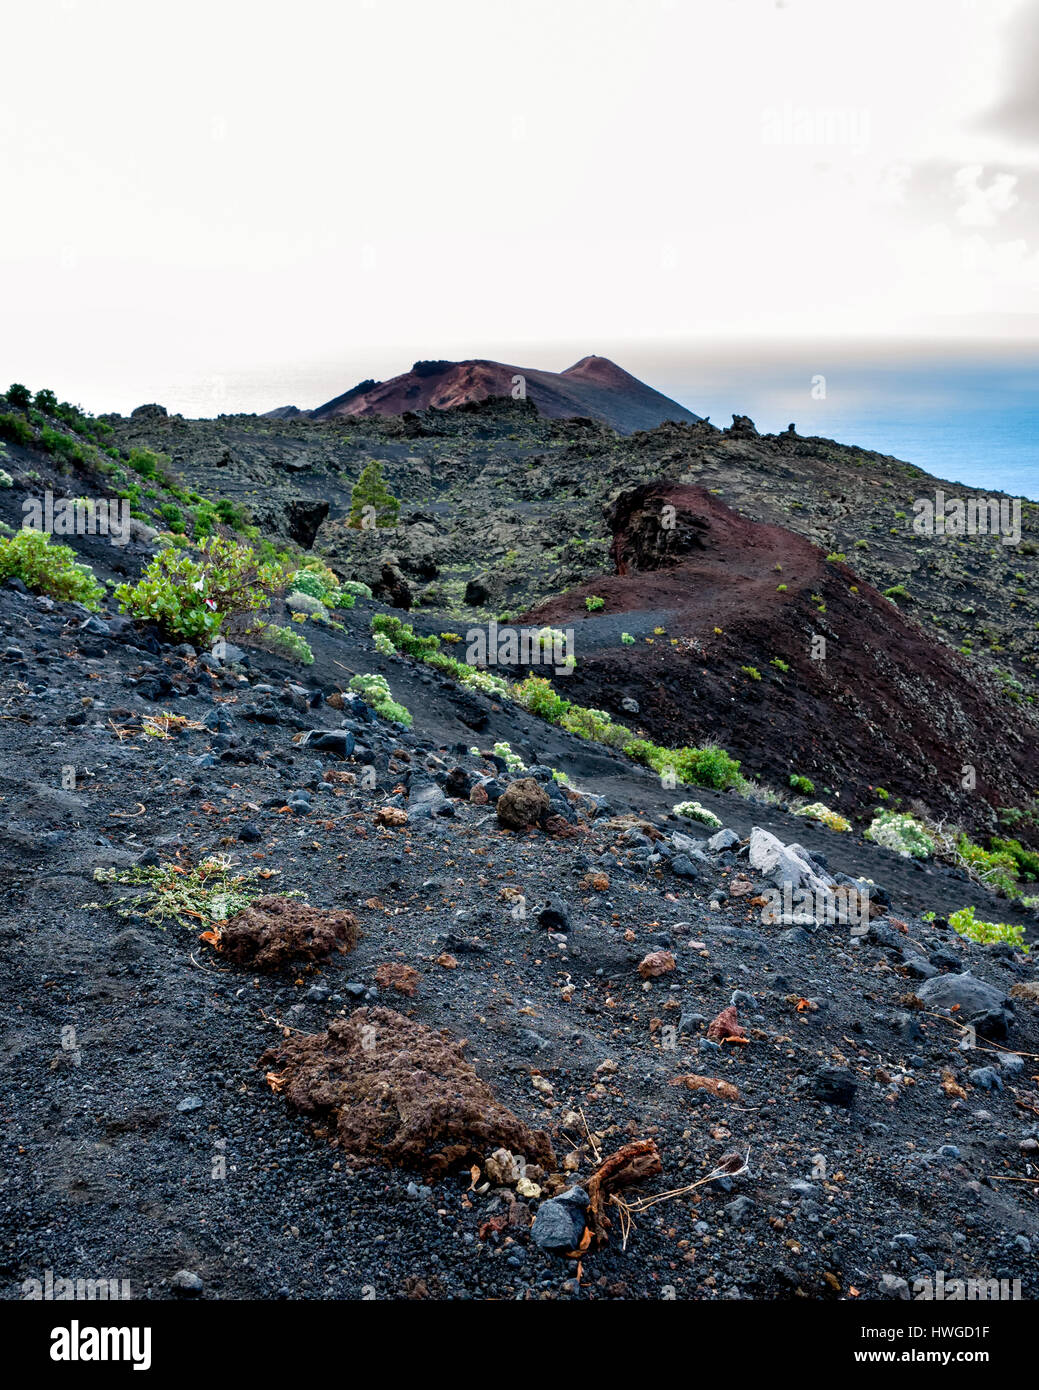 Cumbre Vieja, Fuencaliente. La Palma.  A view along the volcano's winding ridge and geological land formation. Very little vegetation grows in the lava rock of Cumbre Vieja region.  It's a bright day with fast moving clouds. Stock Photo